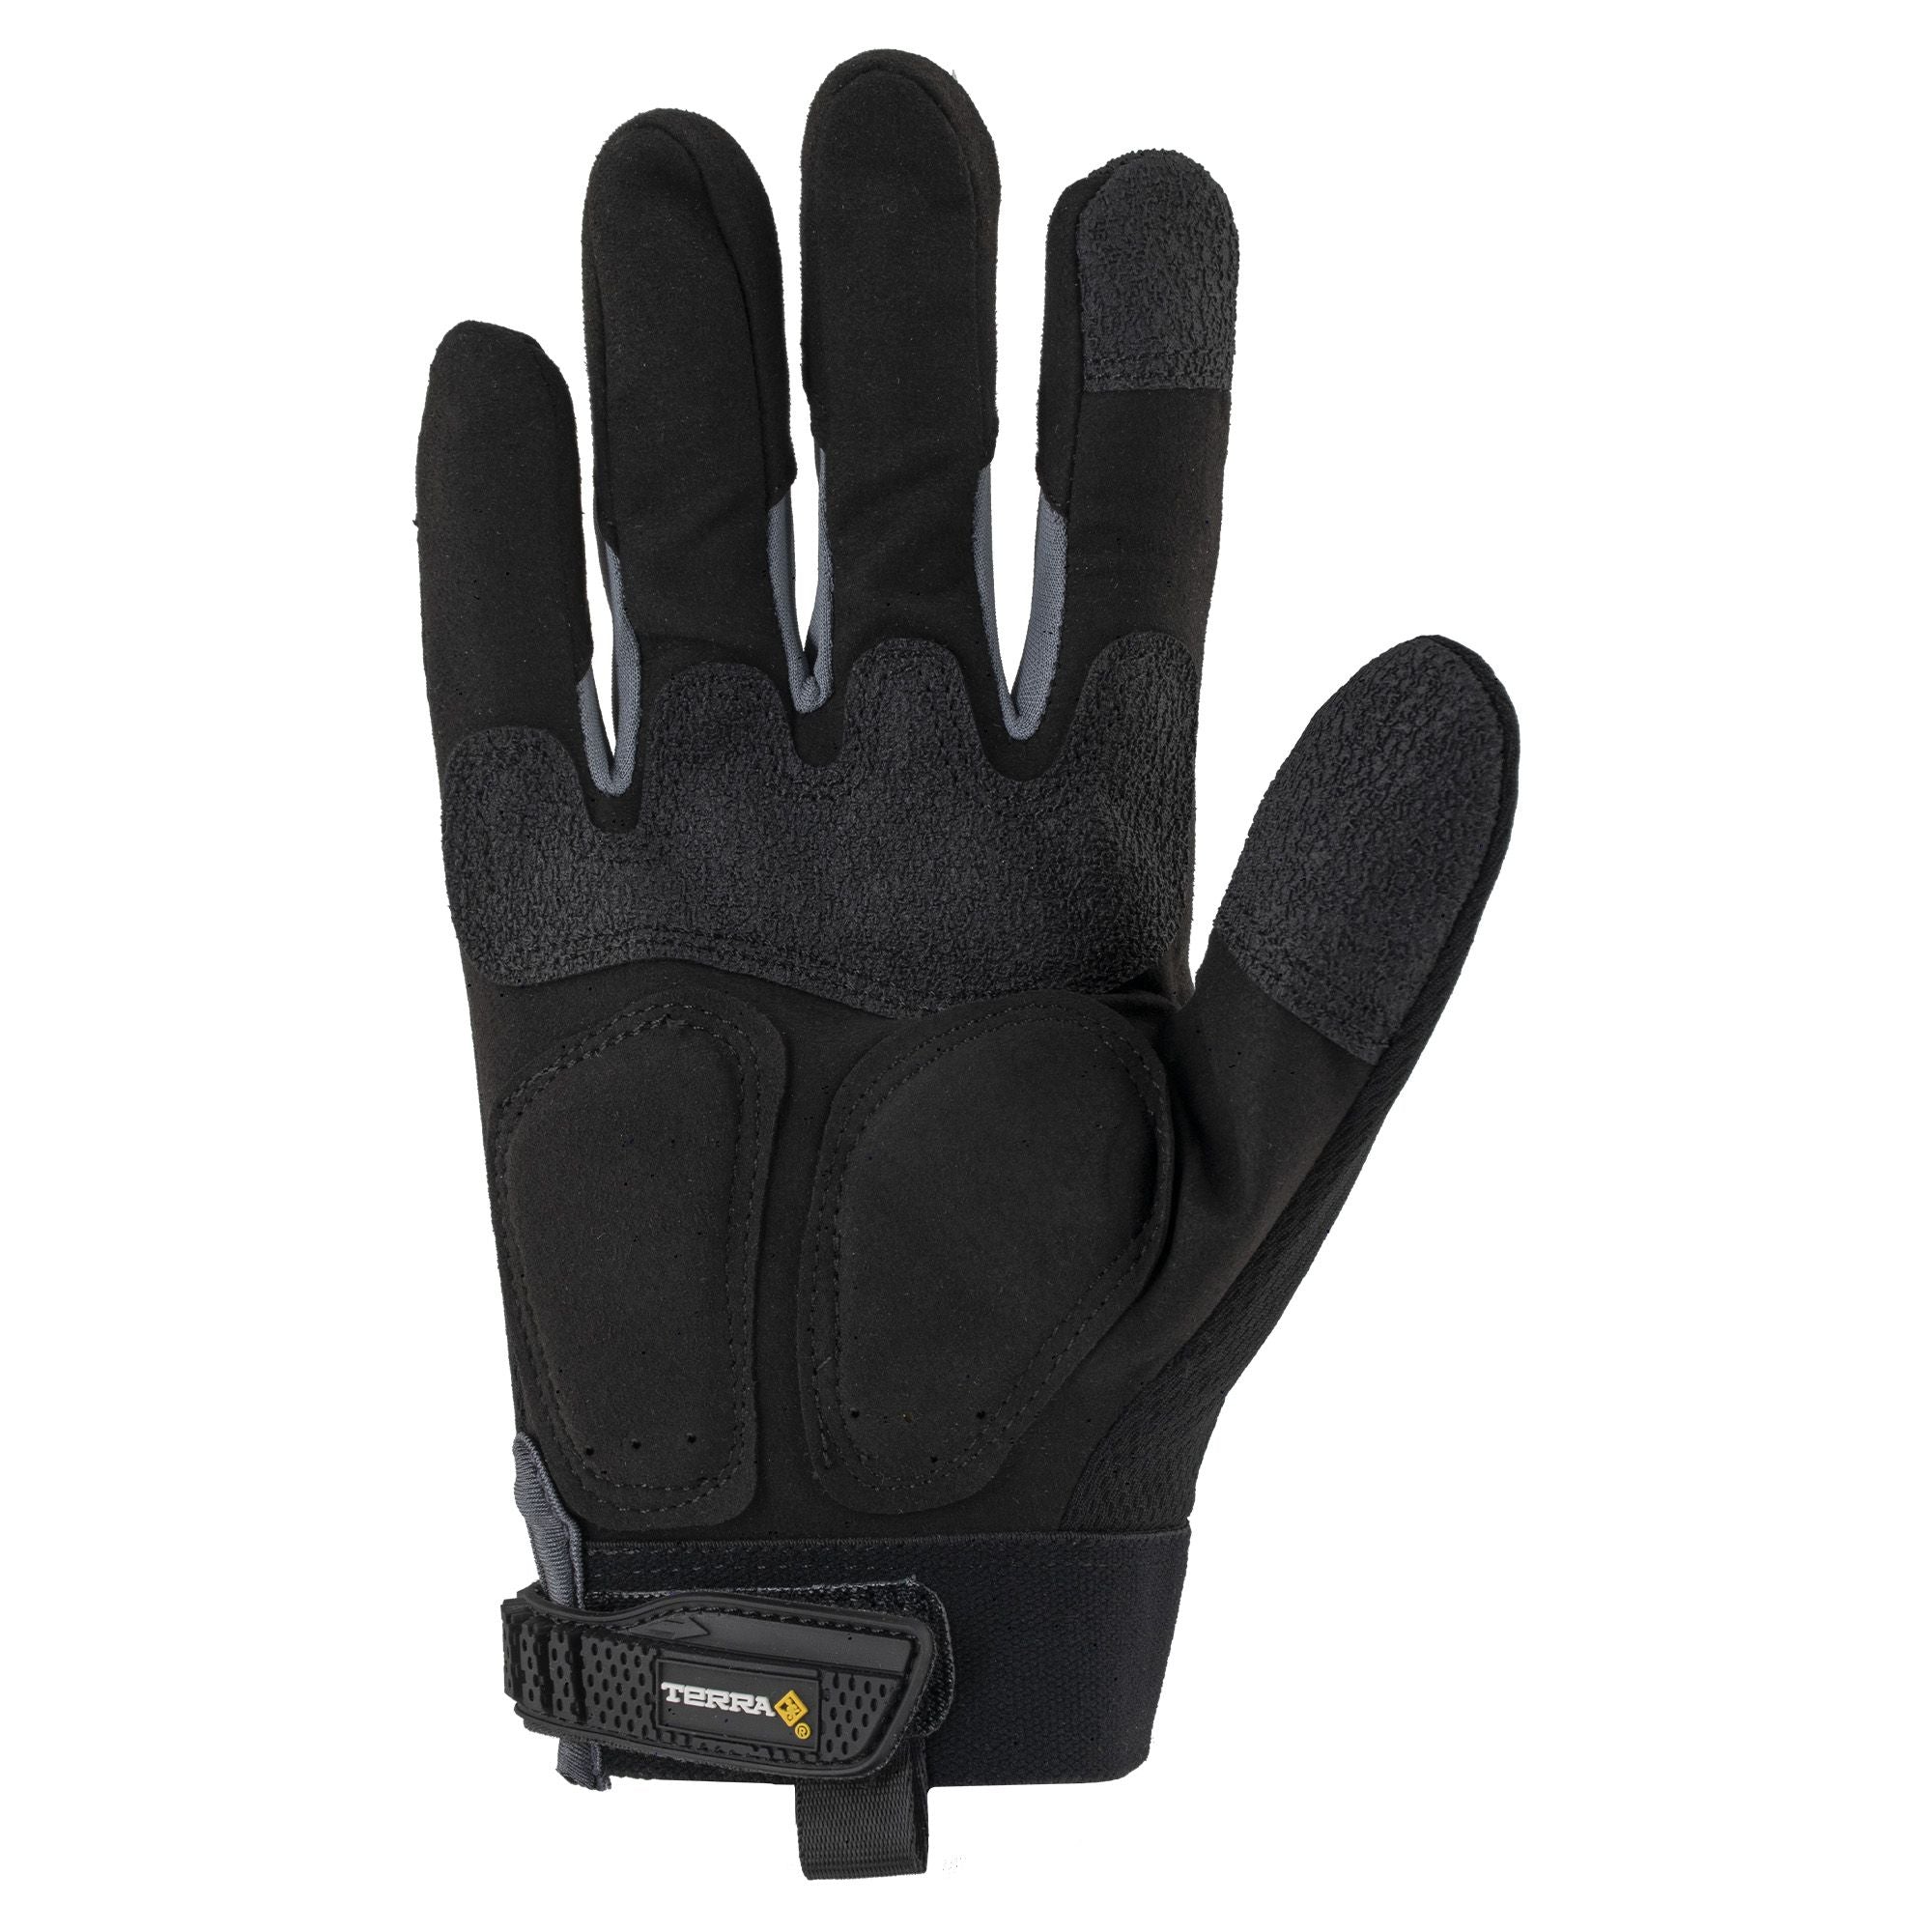 Terra Black Impact Resistant High Performance Work Gloves with Wrist Strap